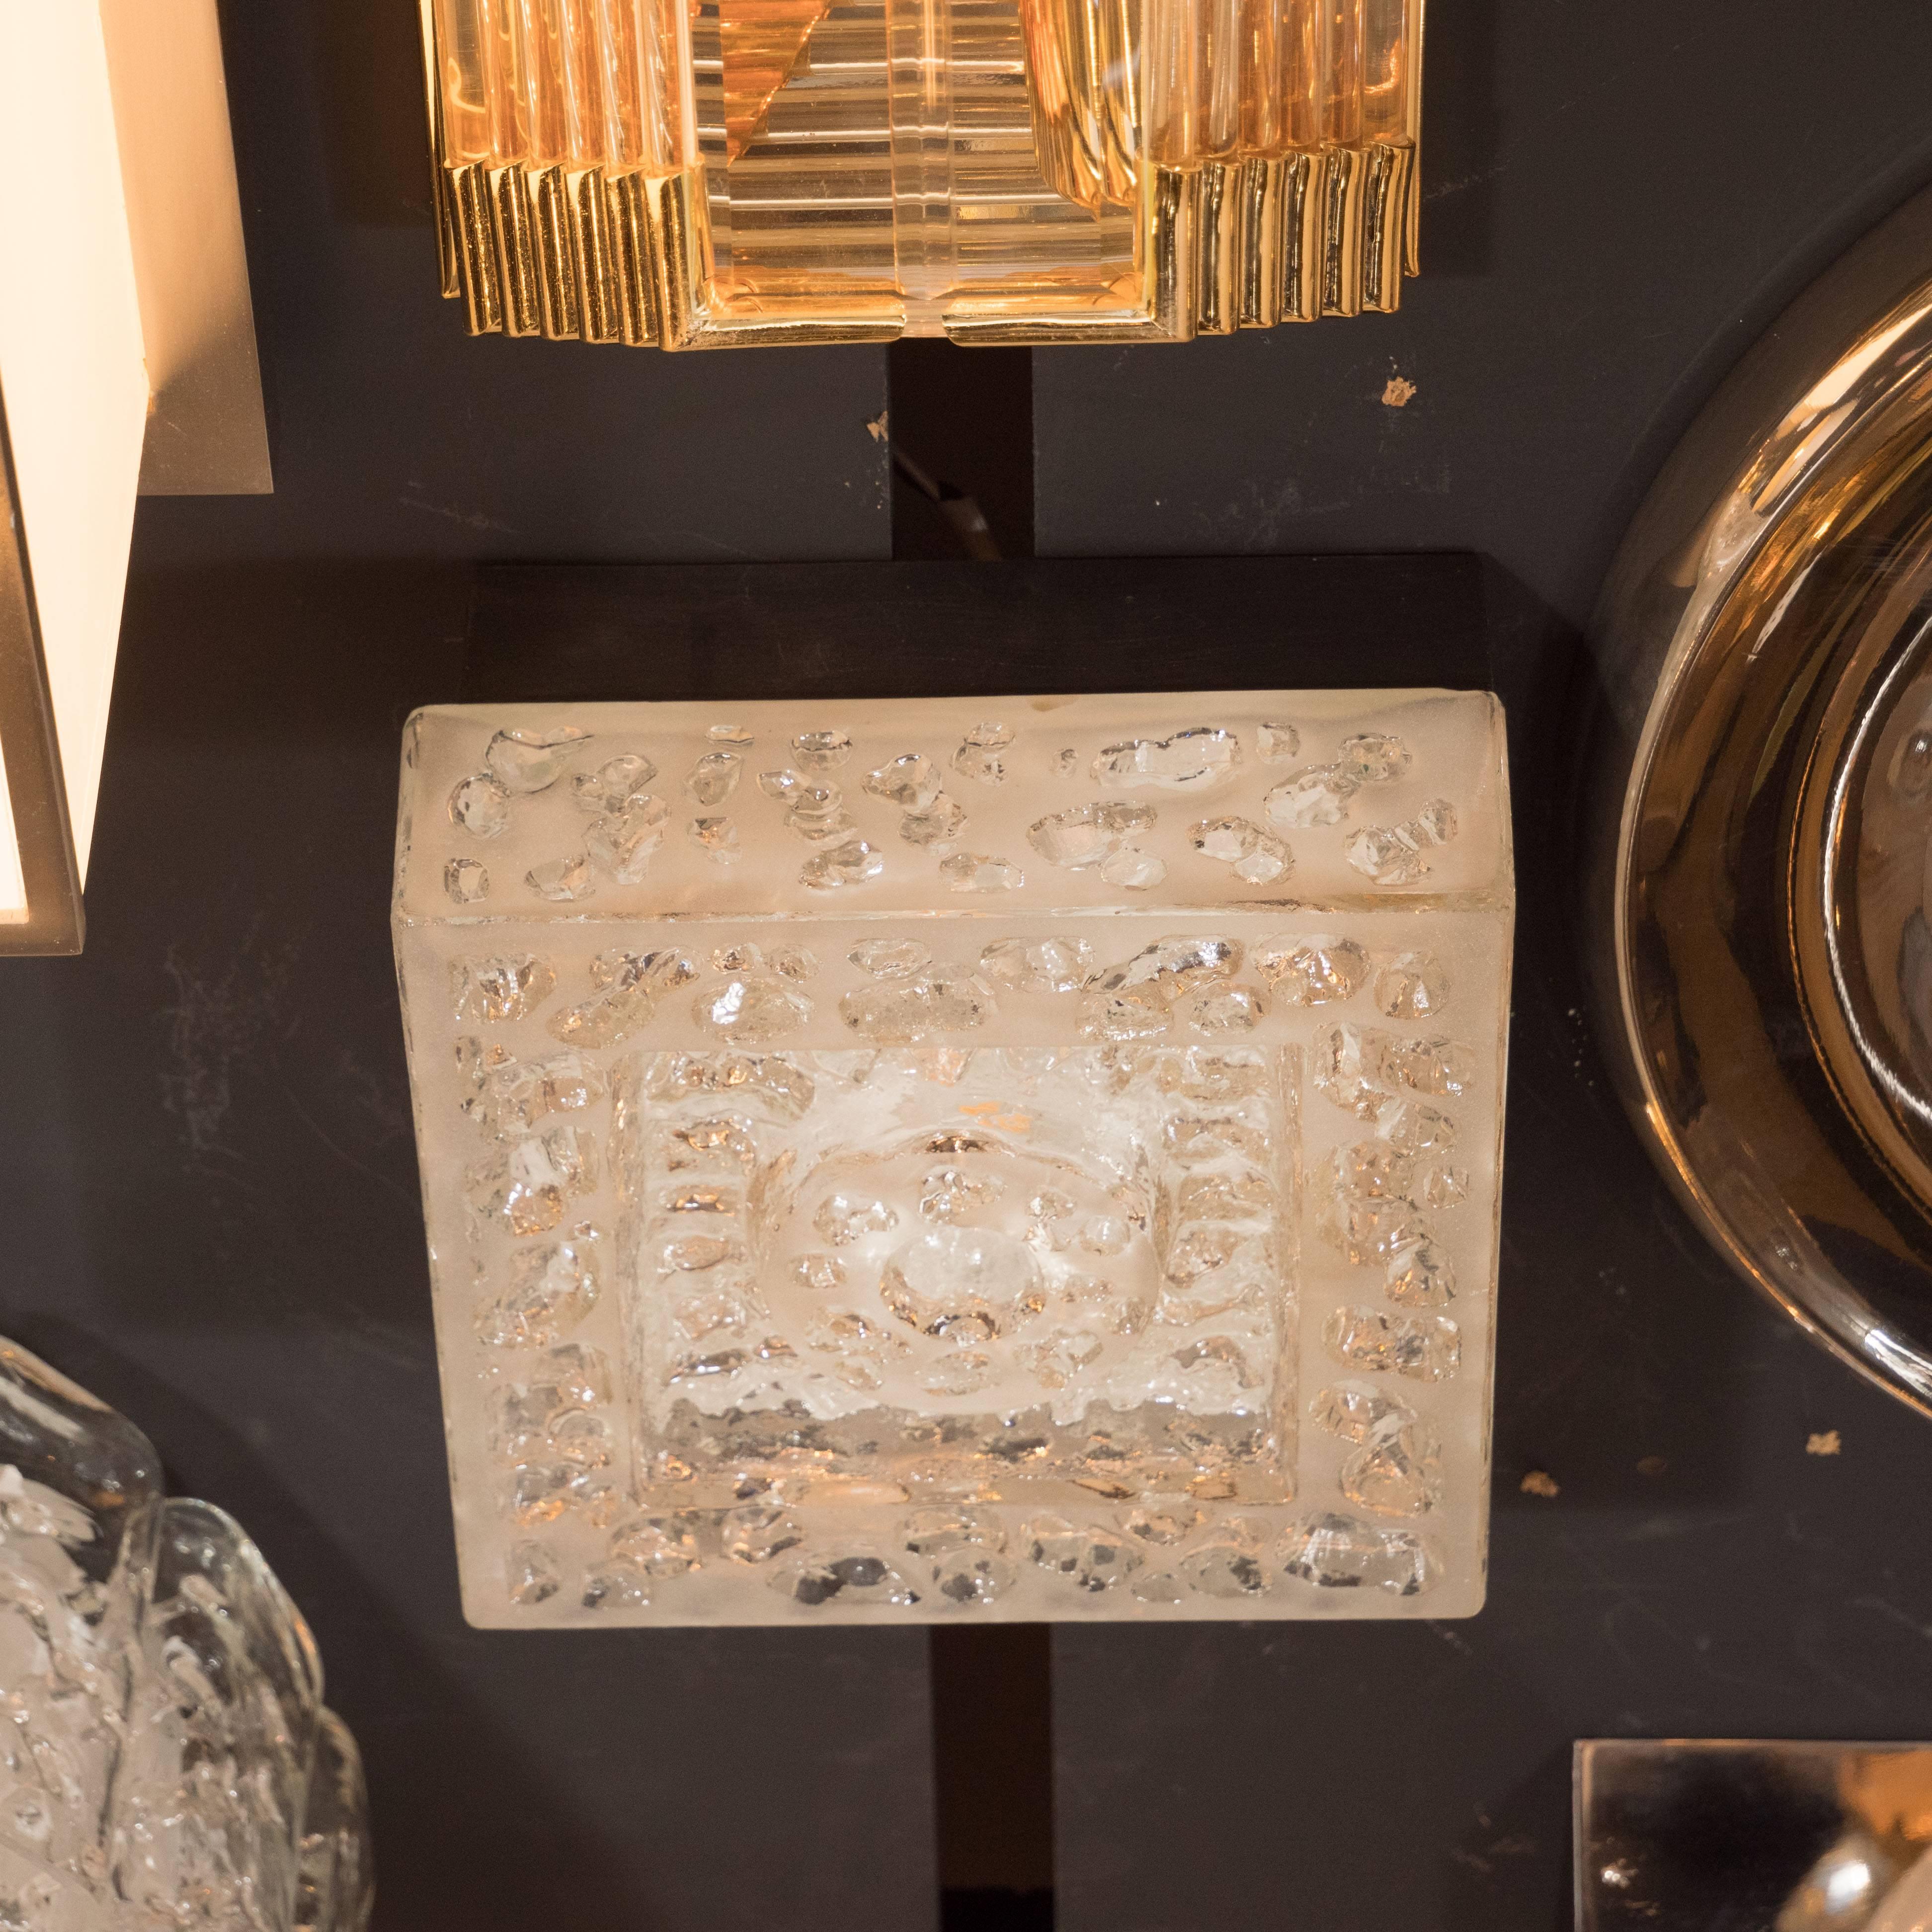 This exquisite flush mount was realized by the illustrious lighting studio, BEGA, in Italy, circa 1960. It features a square glass body with a depression in the center from which a circular form protrudes- all in intricately textured glass offering